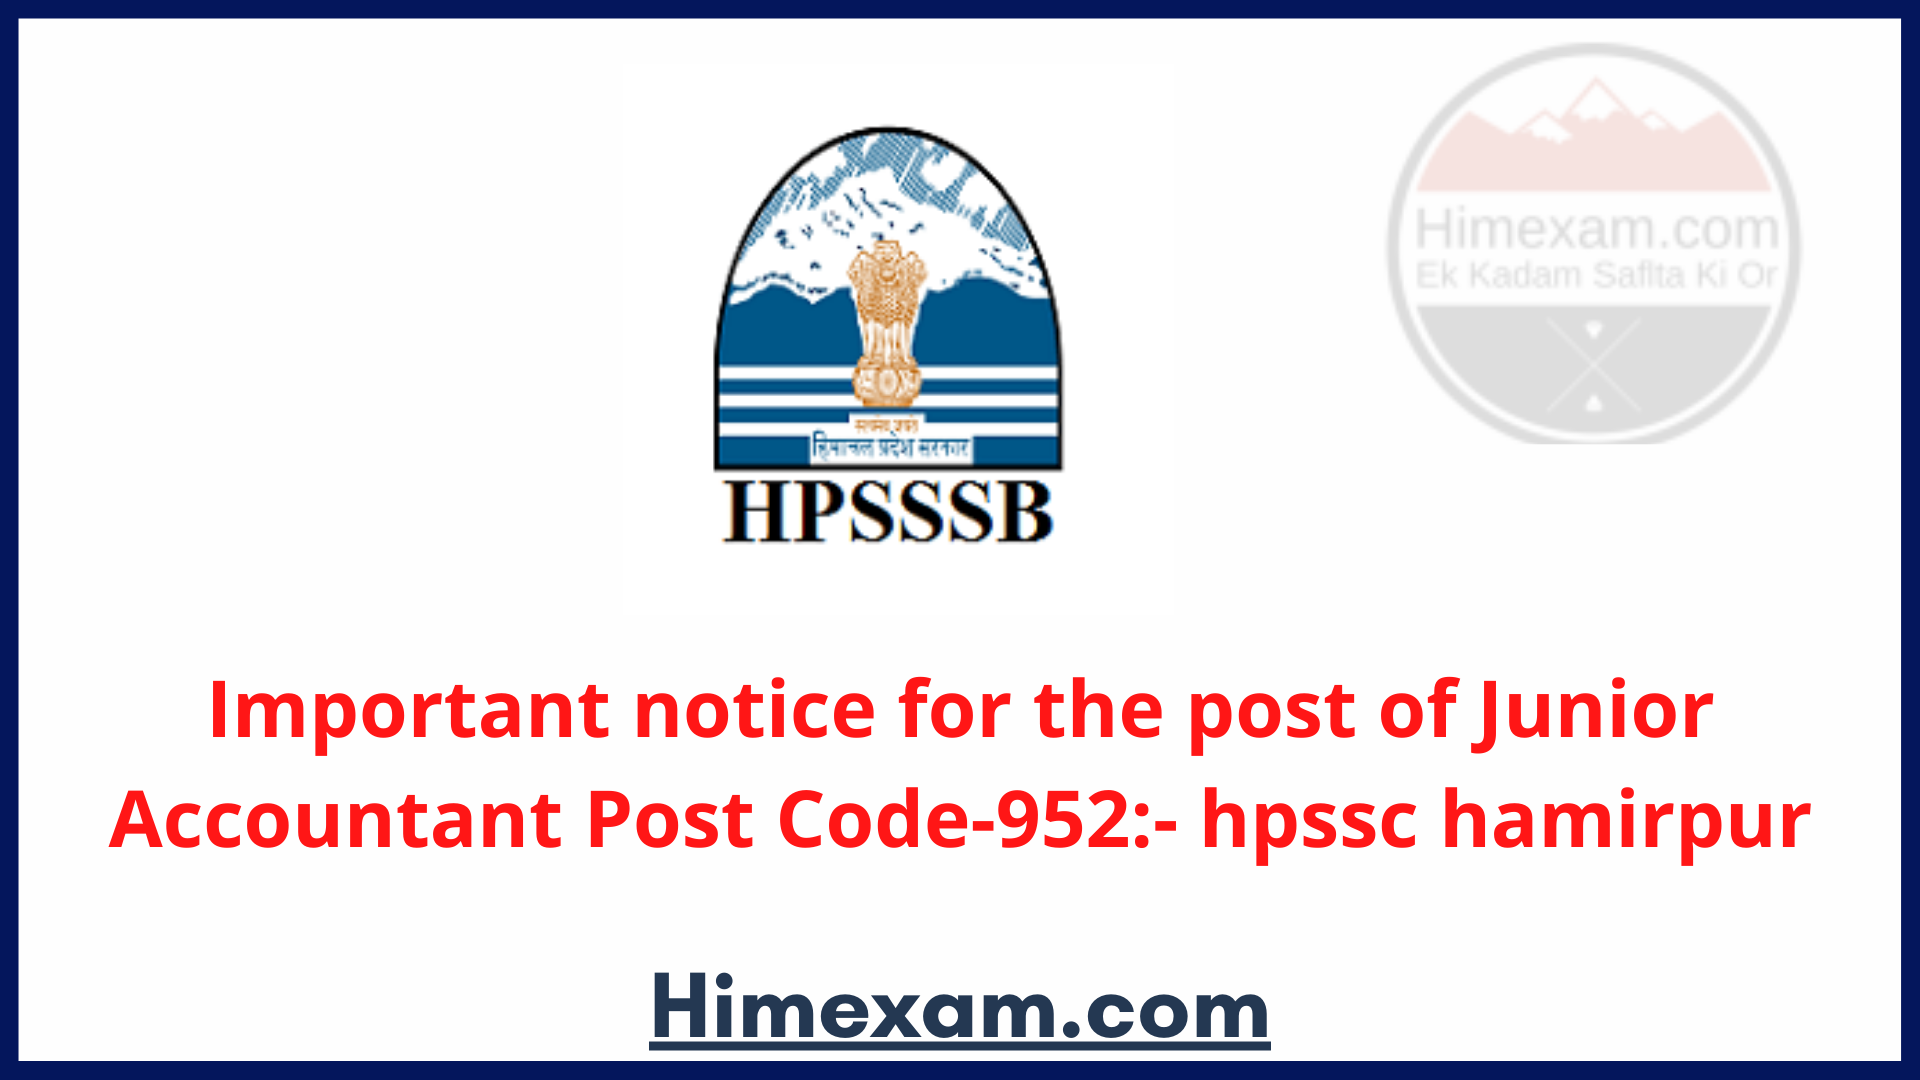 Important notice for the post of Junior Accountant Post Code-952:- hpssc hamirpur